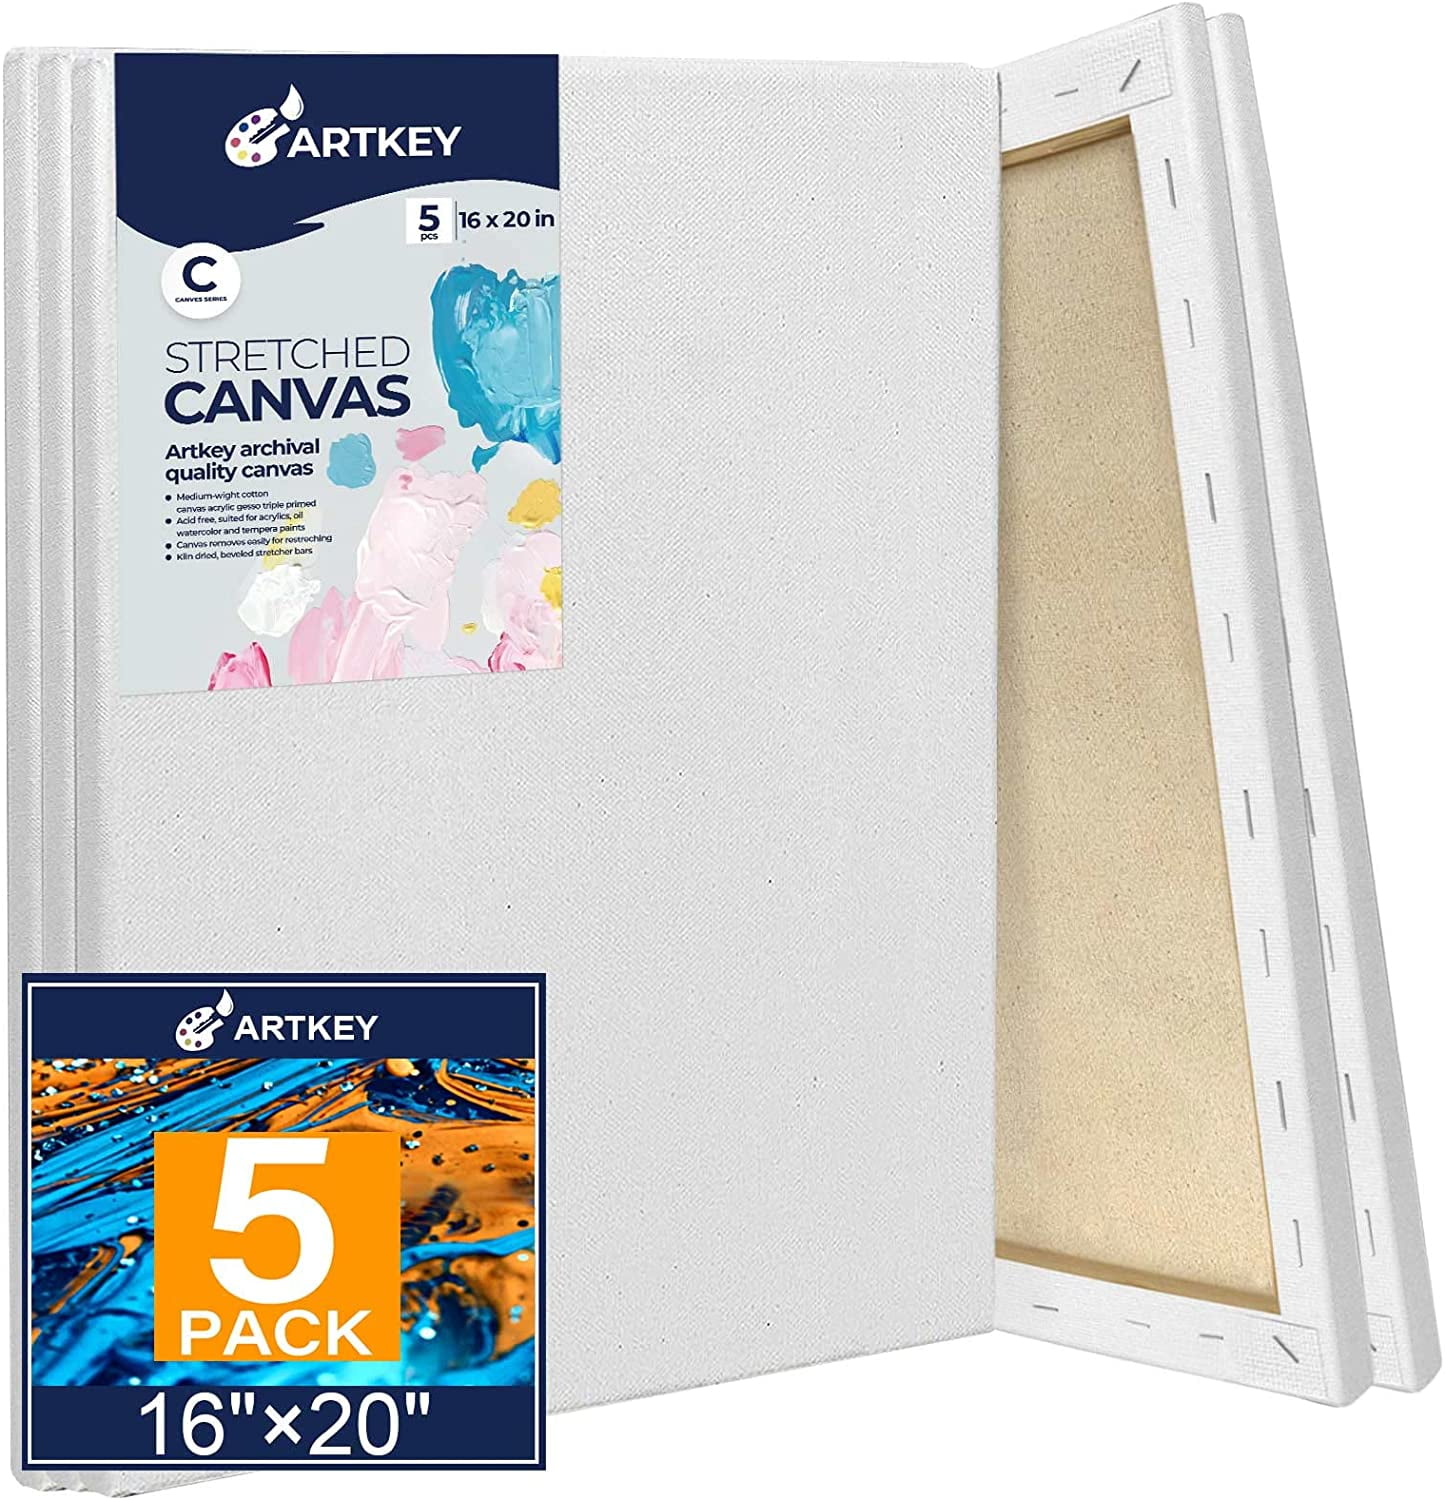  PHOENIX 12 Pack Black Canvases for Painting Canvas Panels  Multipack, 5x7,8x10,9x12,11x14 Inch - 8 Oz Primed Cotton Acid Free Canvas  Boards for Acrylic, Oil, Tempera, Metallic Painting & Crafting : Everything